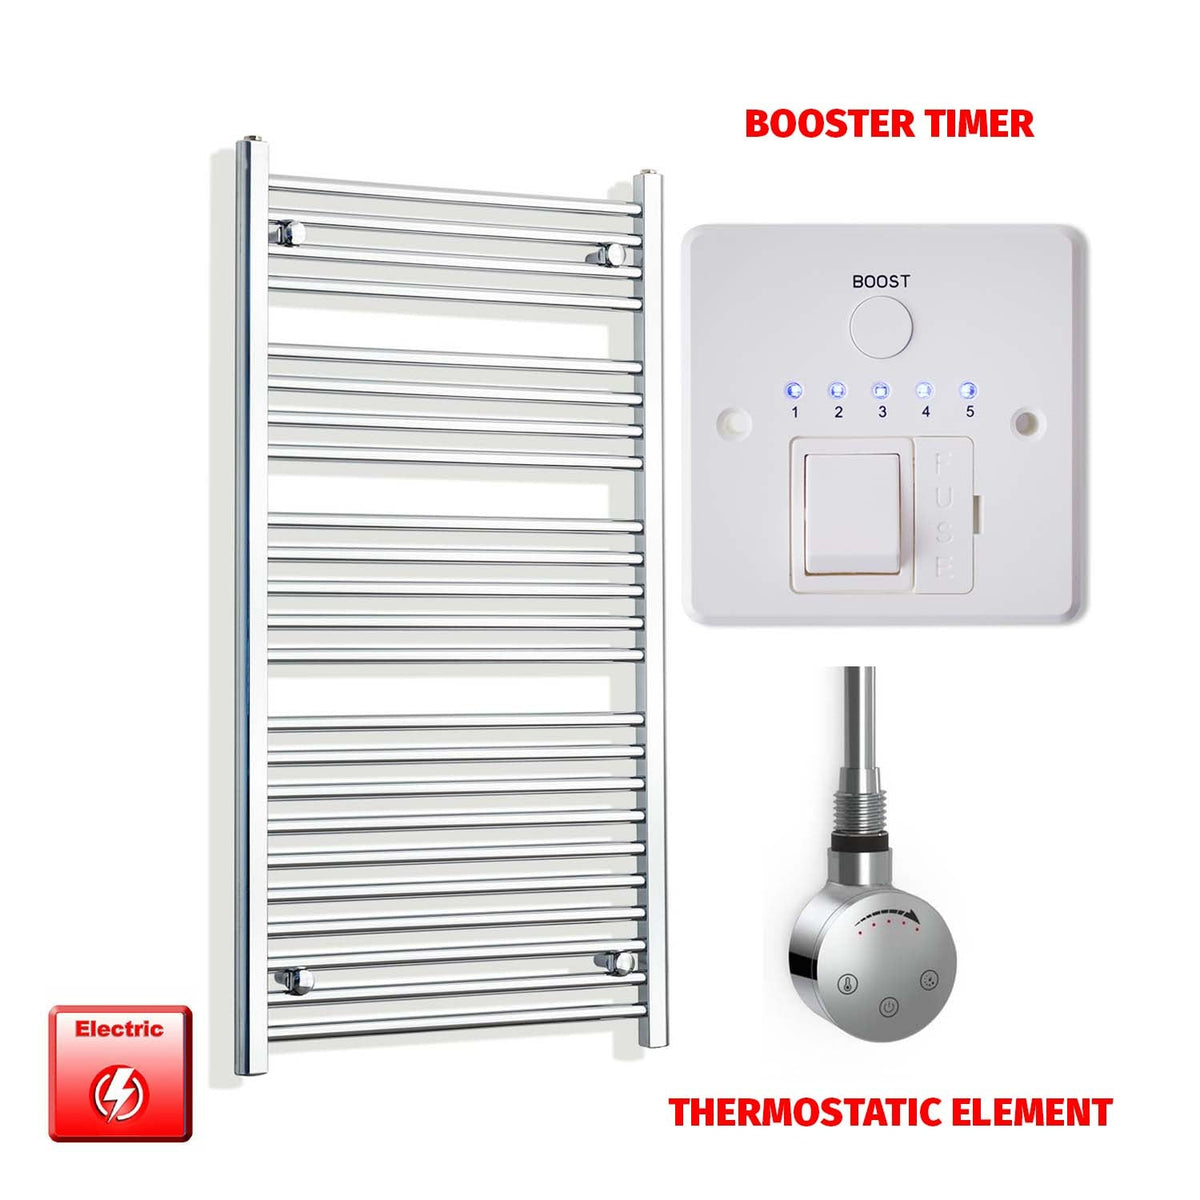 1200mm High 550mm Wide Pre-Filled Electric Heated Towel Radiator Chrome HTR SMR Thermostatic element Booster timer